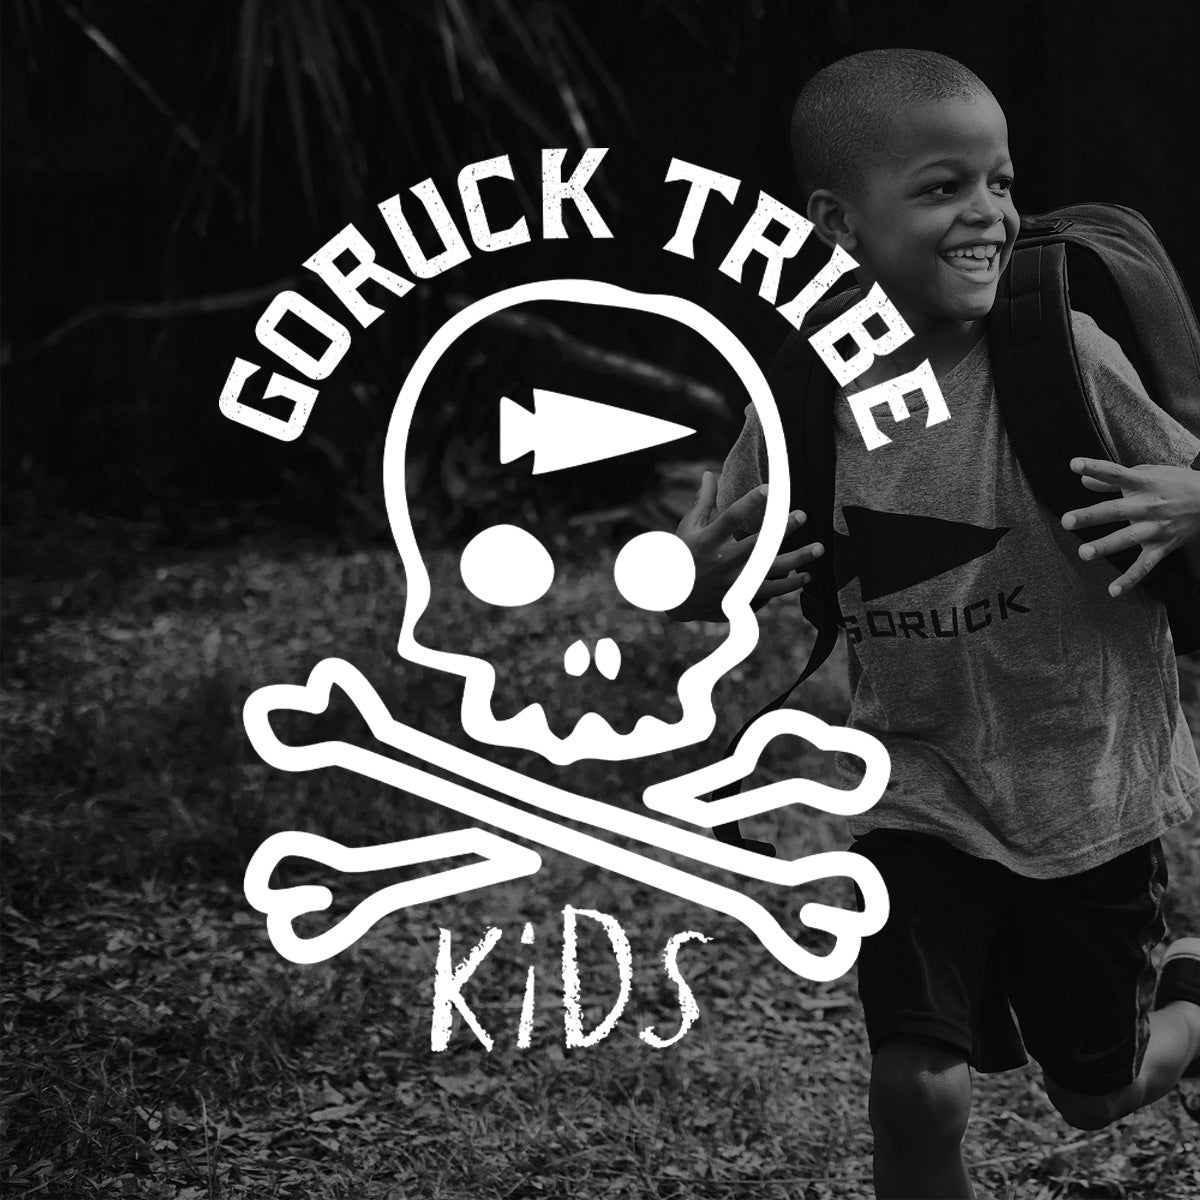 GORUCK Tribe Kids (Monthly Subscription)